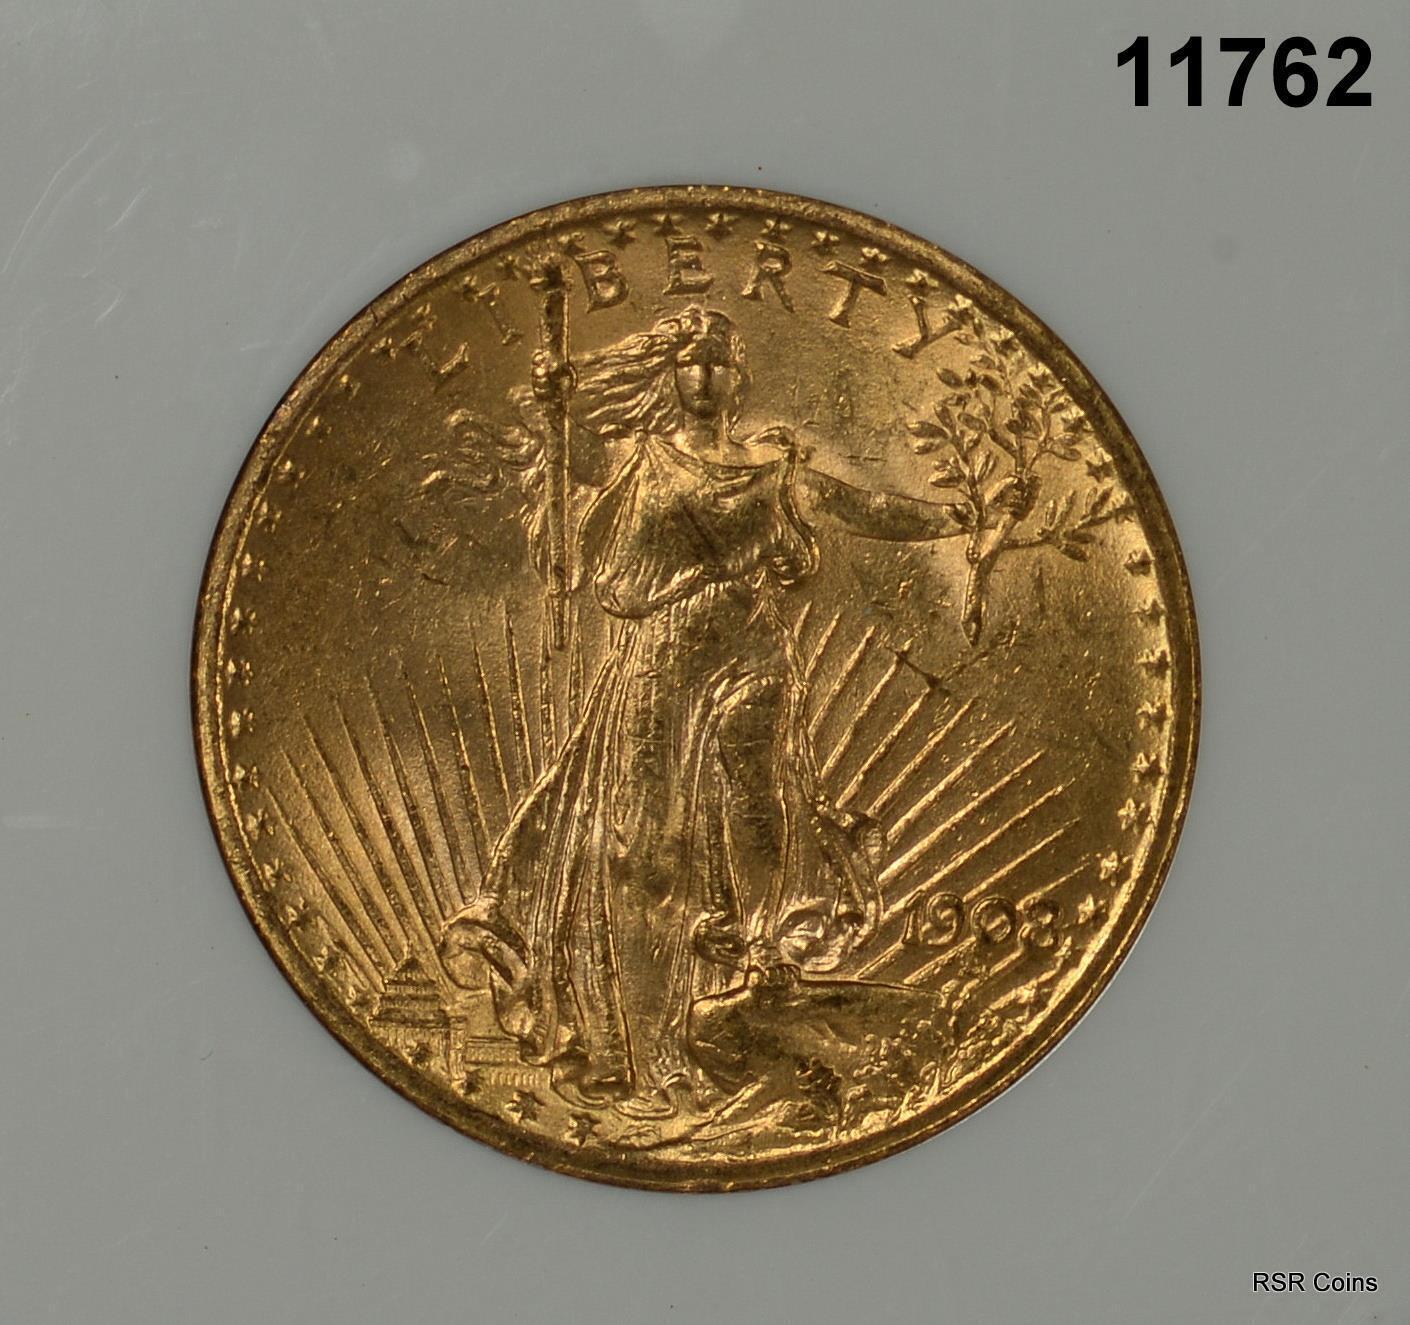 1908 NO MOTTO $20 ST GAUDENS GOLD DOUBLE EAGLE NGC CERTIFIED MS63! #11762